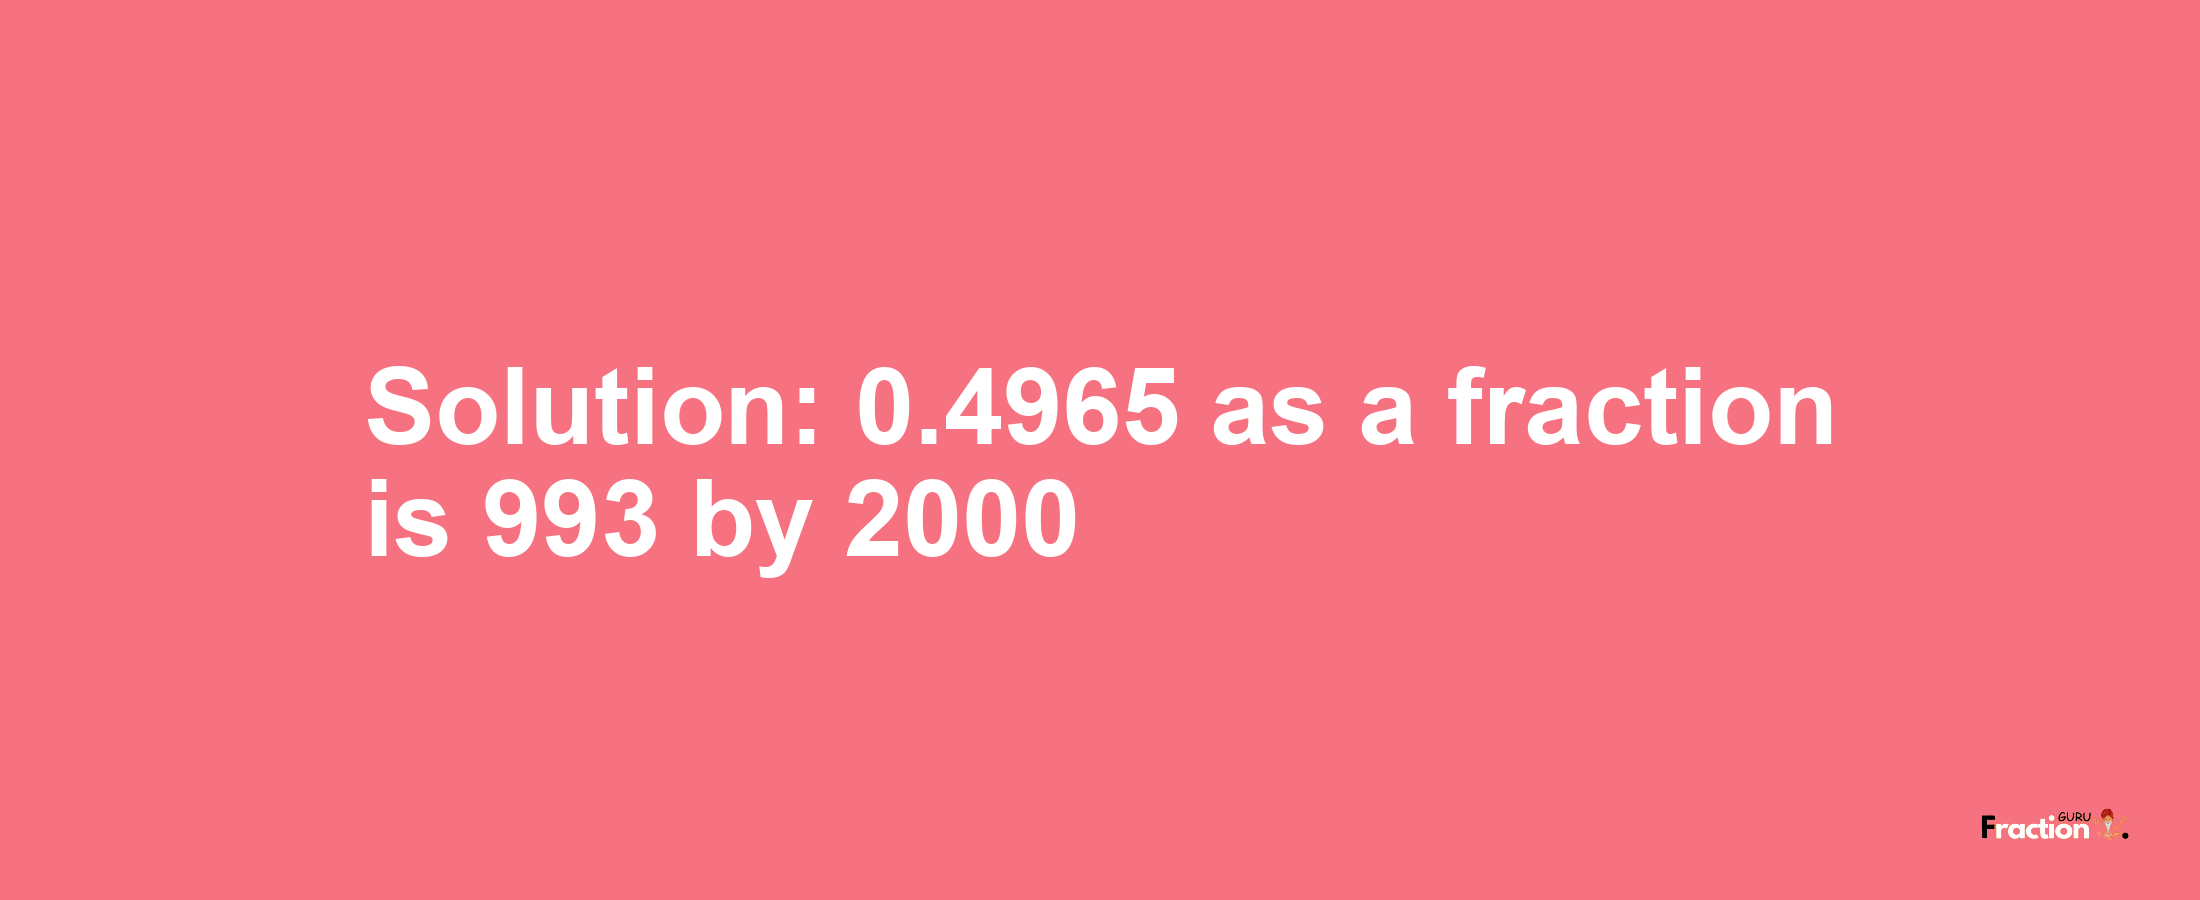 Solution:0.4965 as a fraction is 993/2000